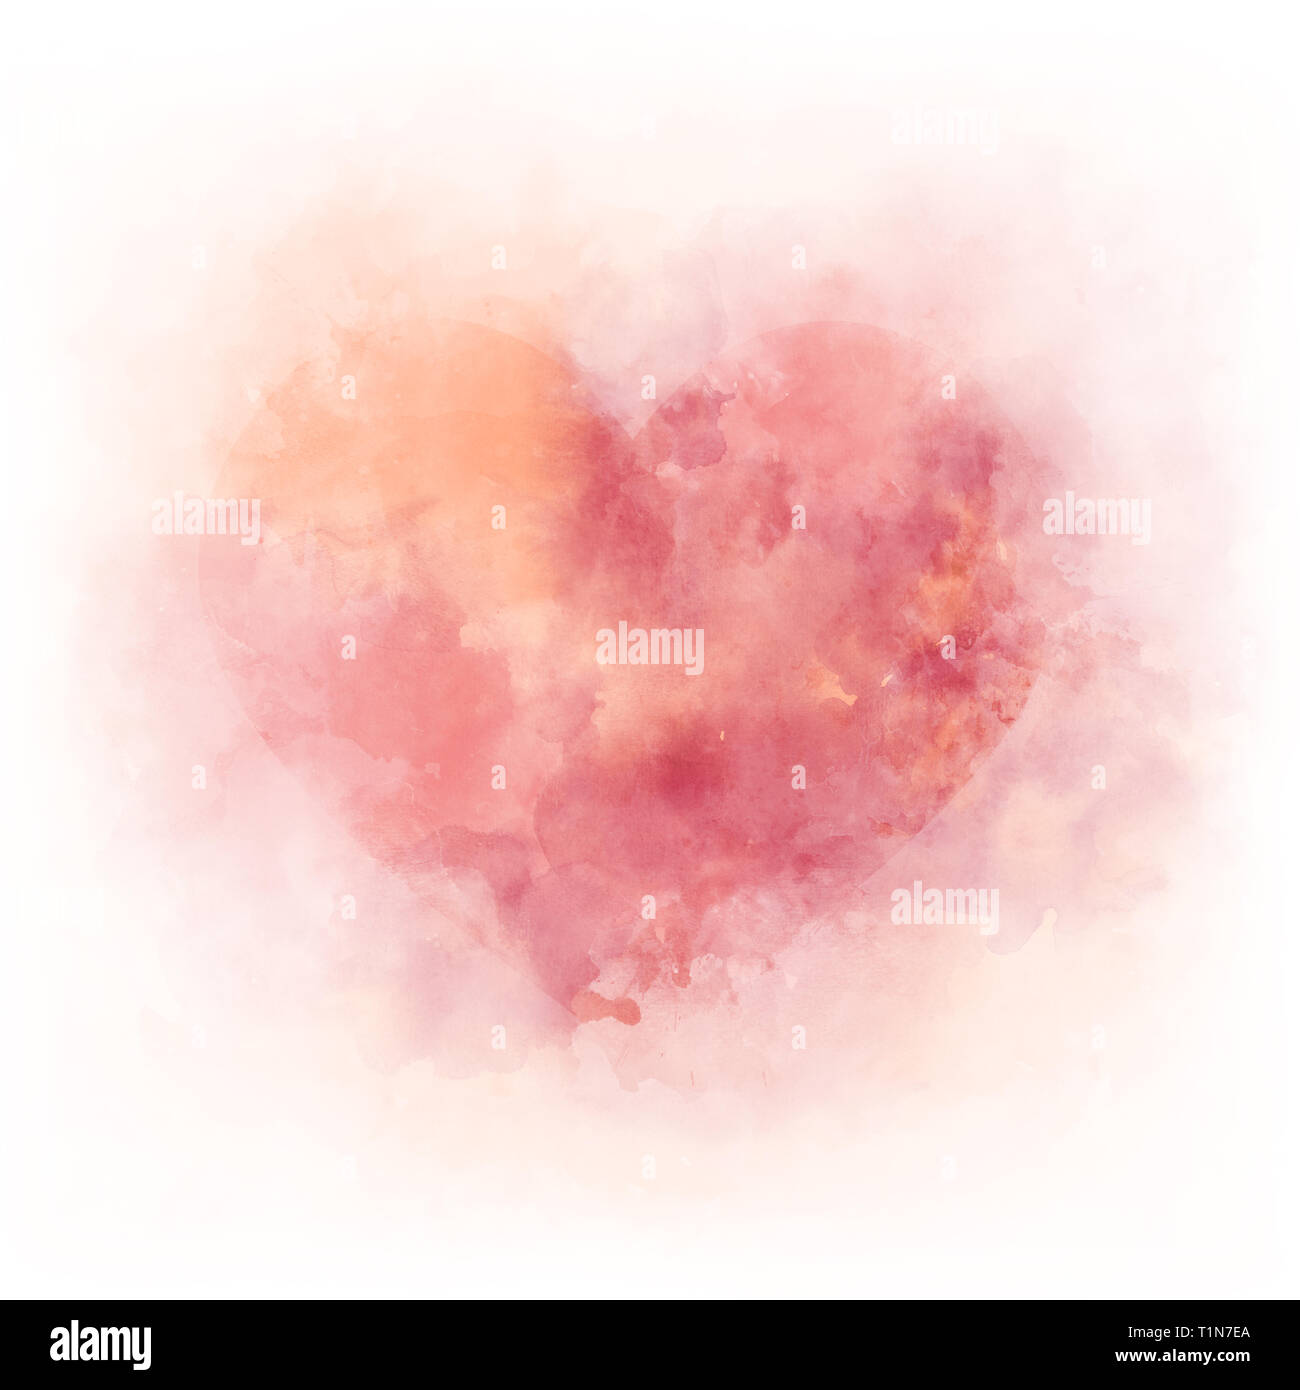 Gentle pink watercolor heart - romantic ald love element, background isolated on white Stock Photo